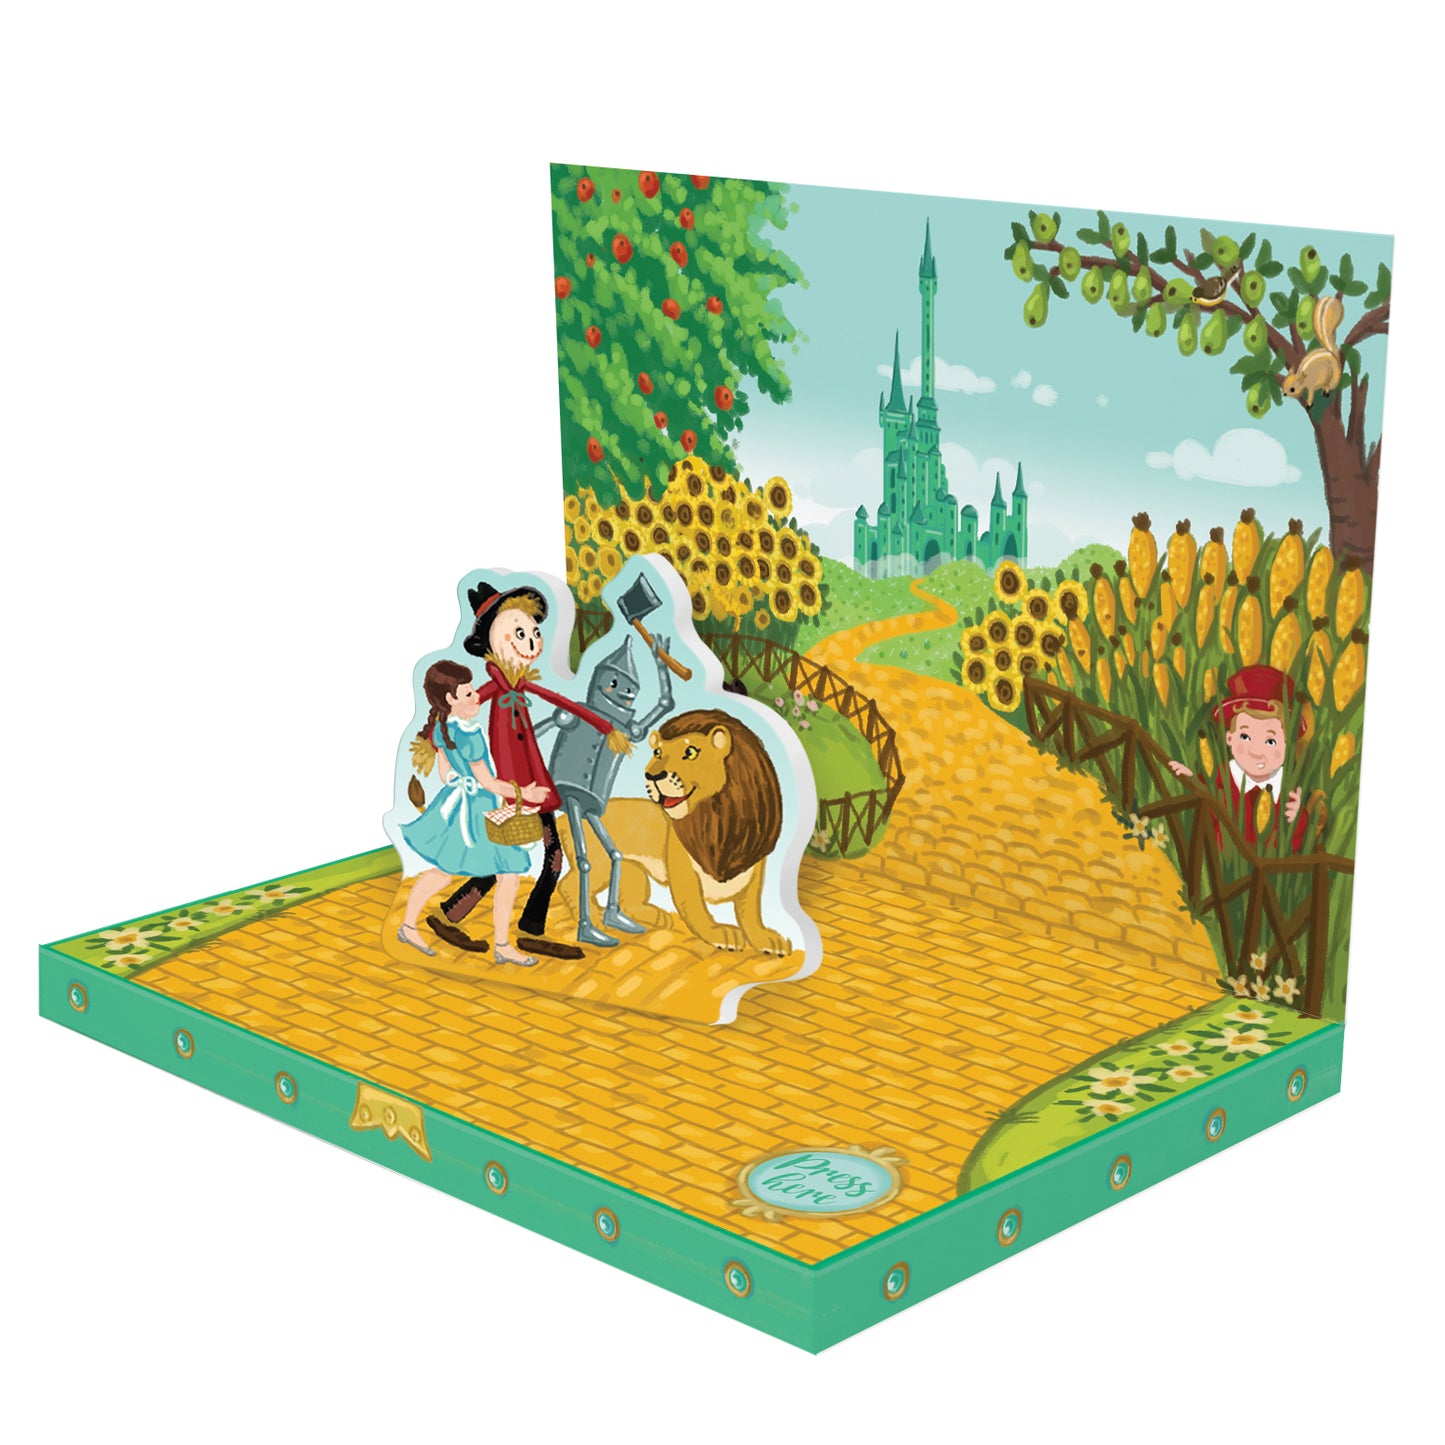 An Adventure In Oz Music Box Card Novelty Dancing Musical Greeting Card